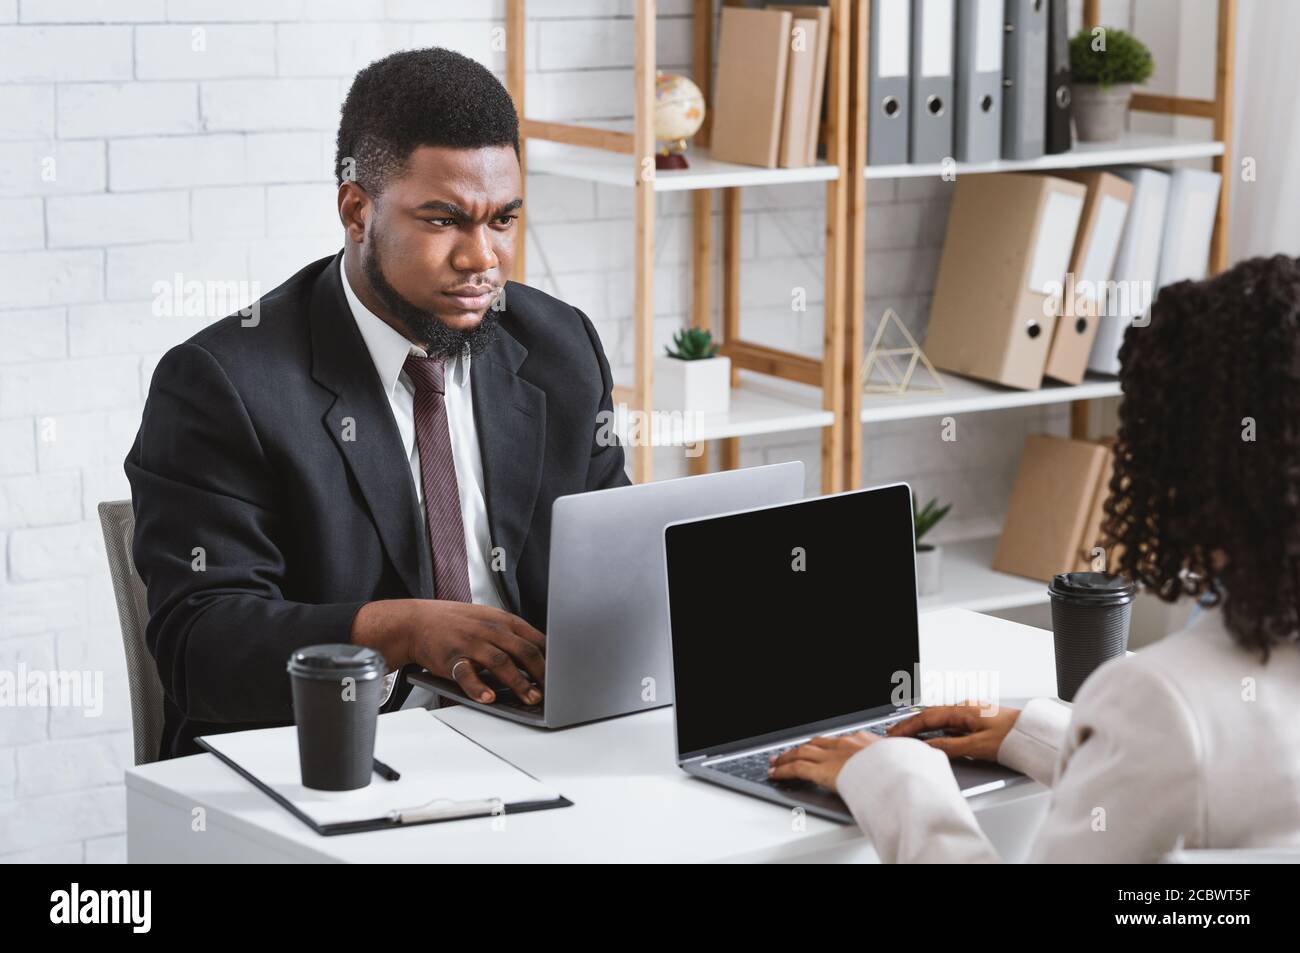 Workplace conflict. Displeased African American guy having disagreement with his female colleague at office, free space Stock Photo